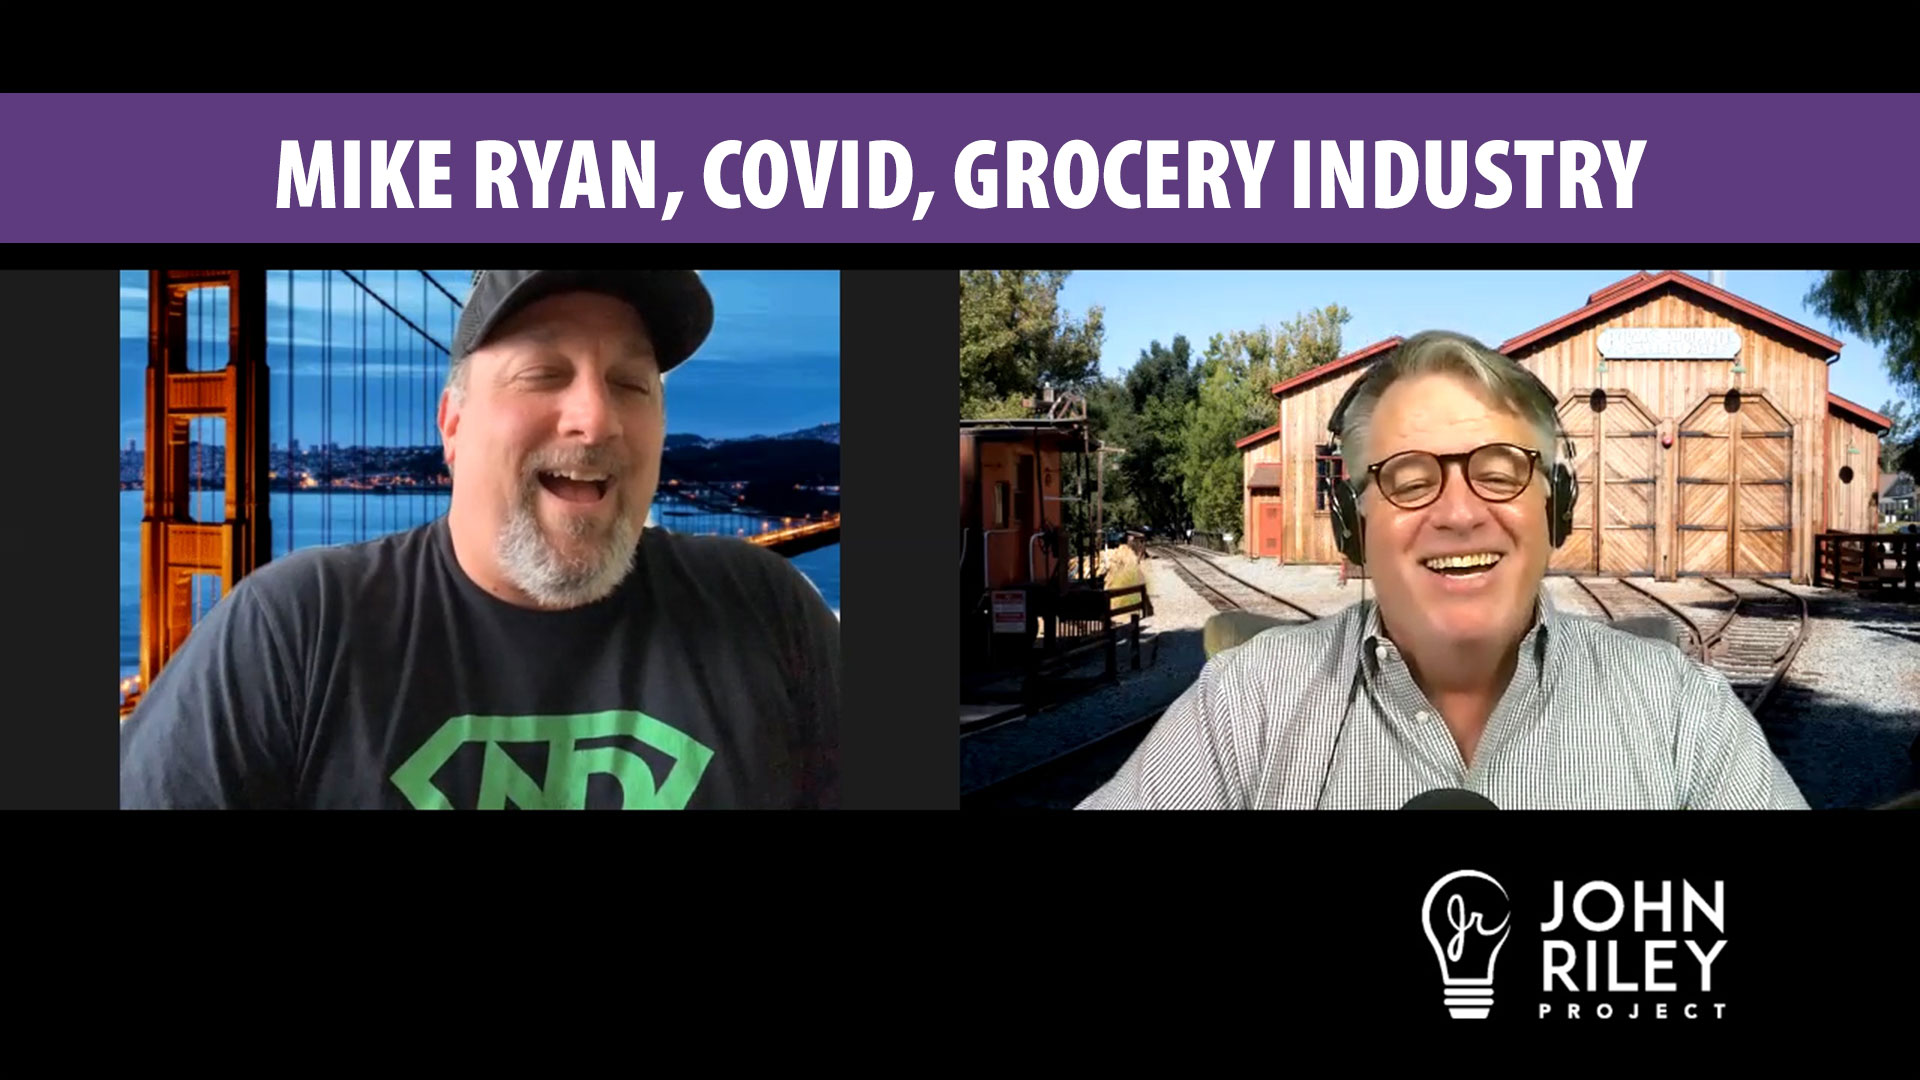 Mike Ryan, Grocery Industry, COVID, John Riley Project, JRP0129